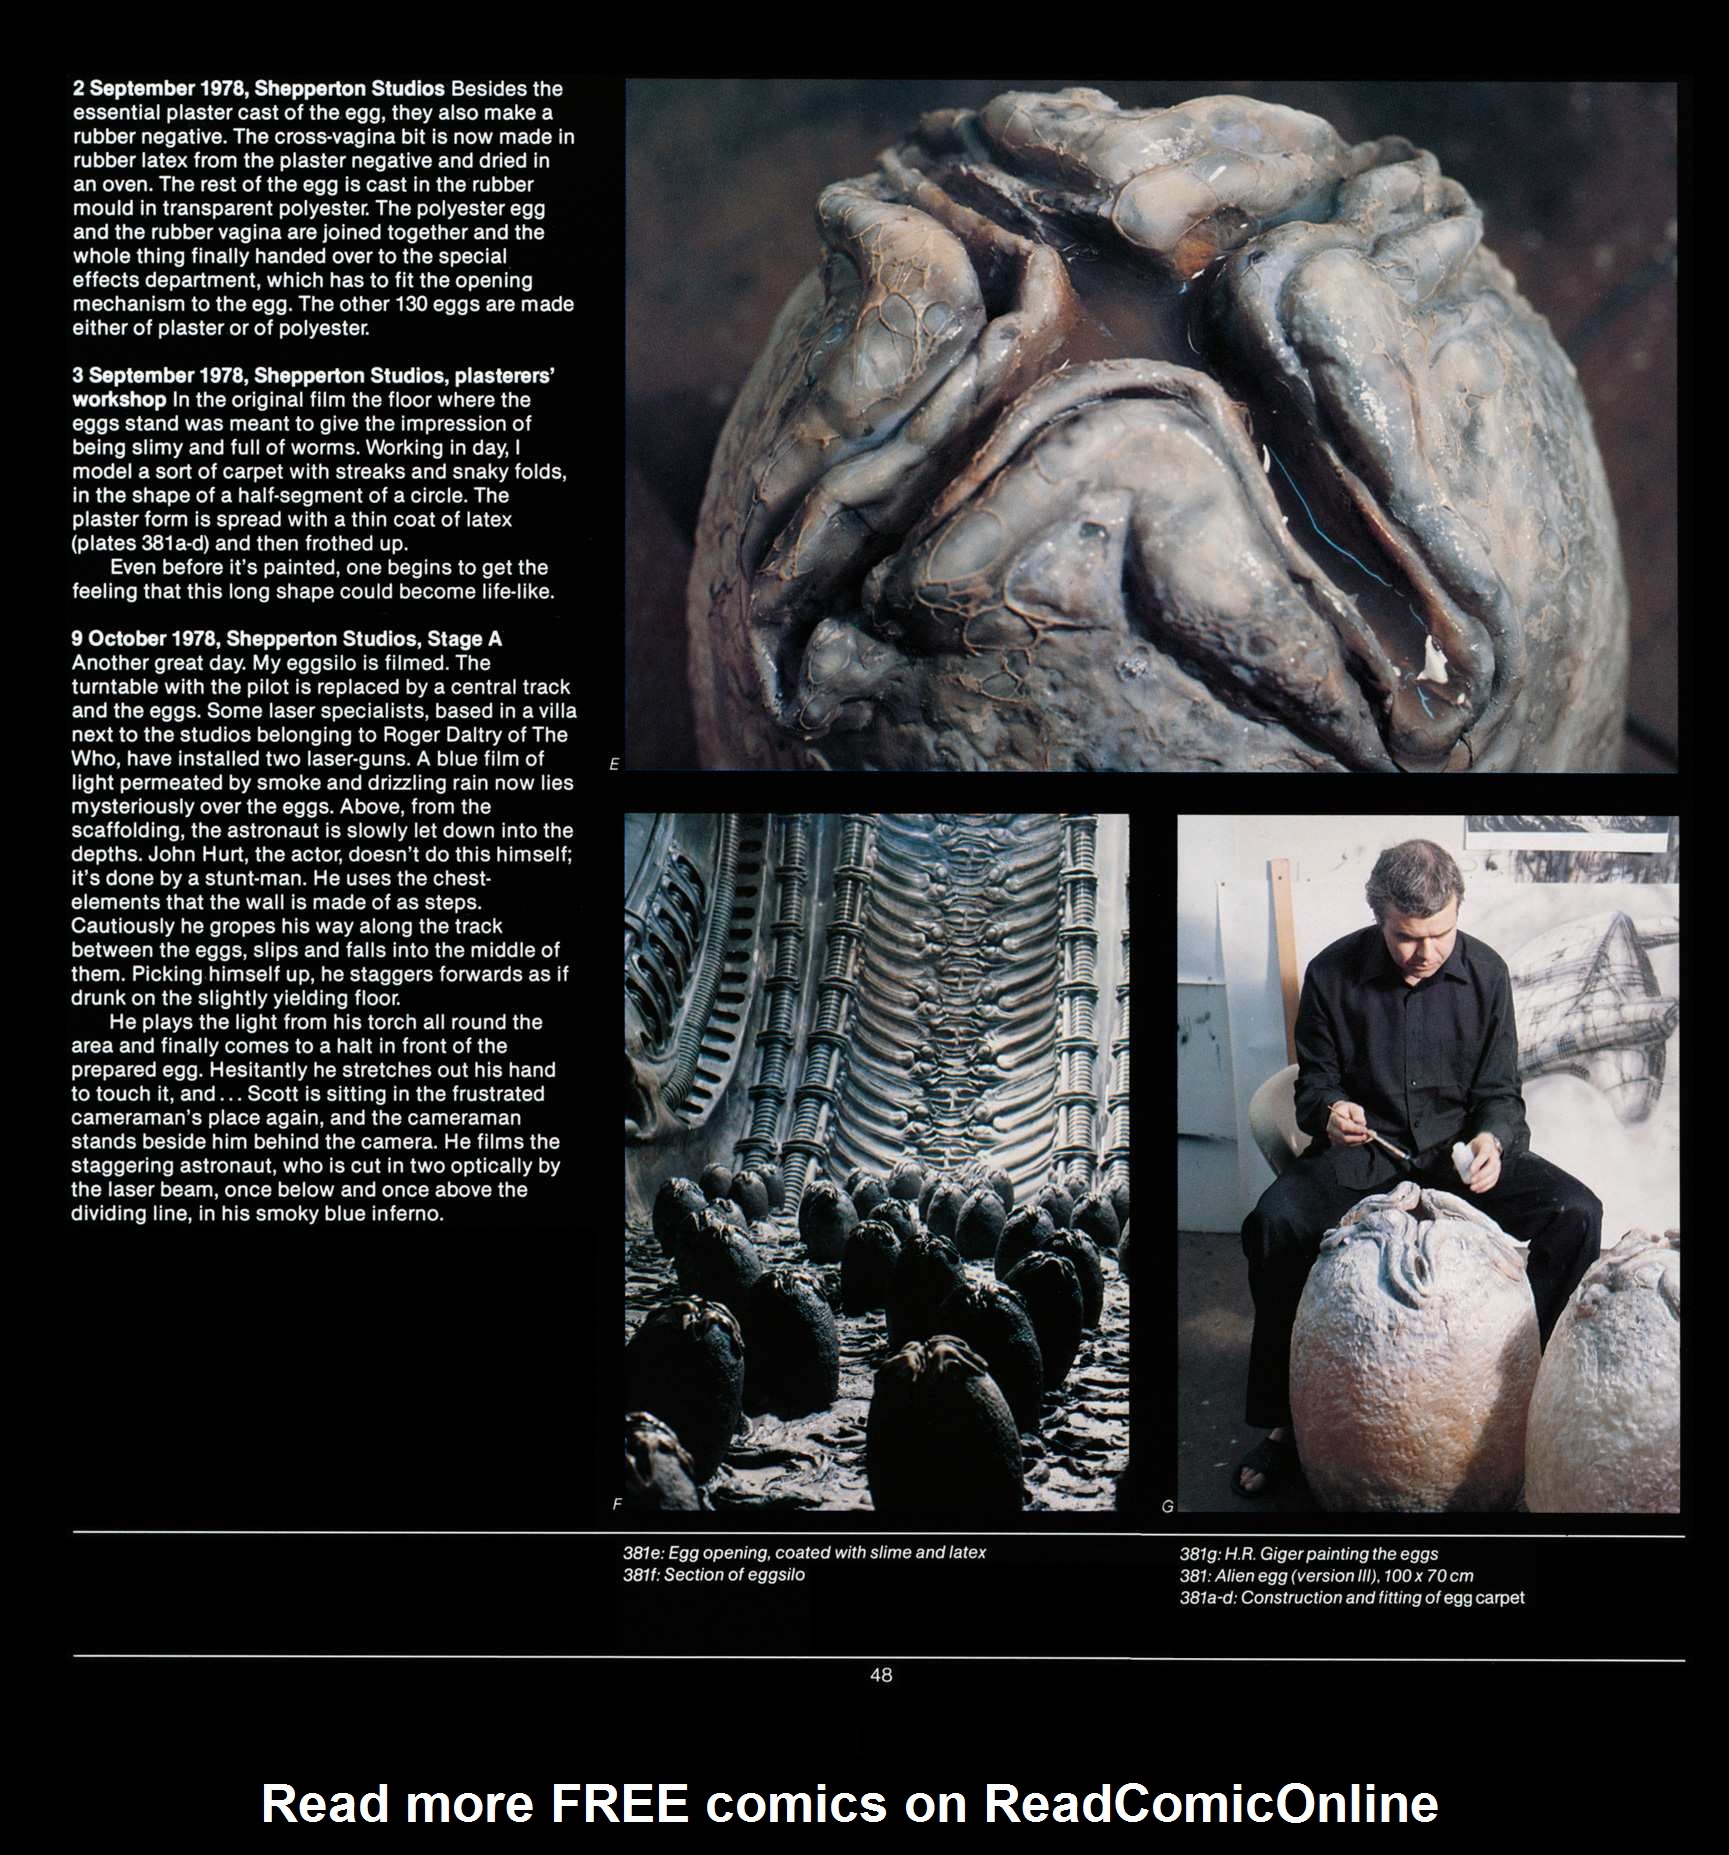 Read online Giger's Alien comic -  Issue # TPB - 50